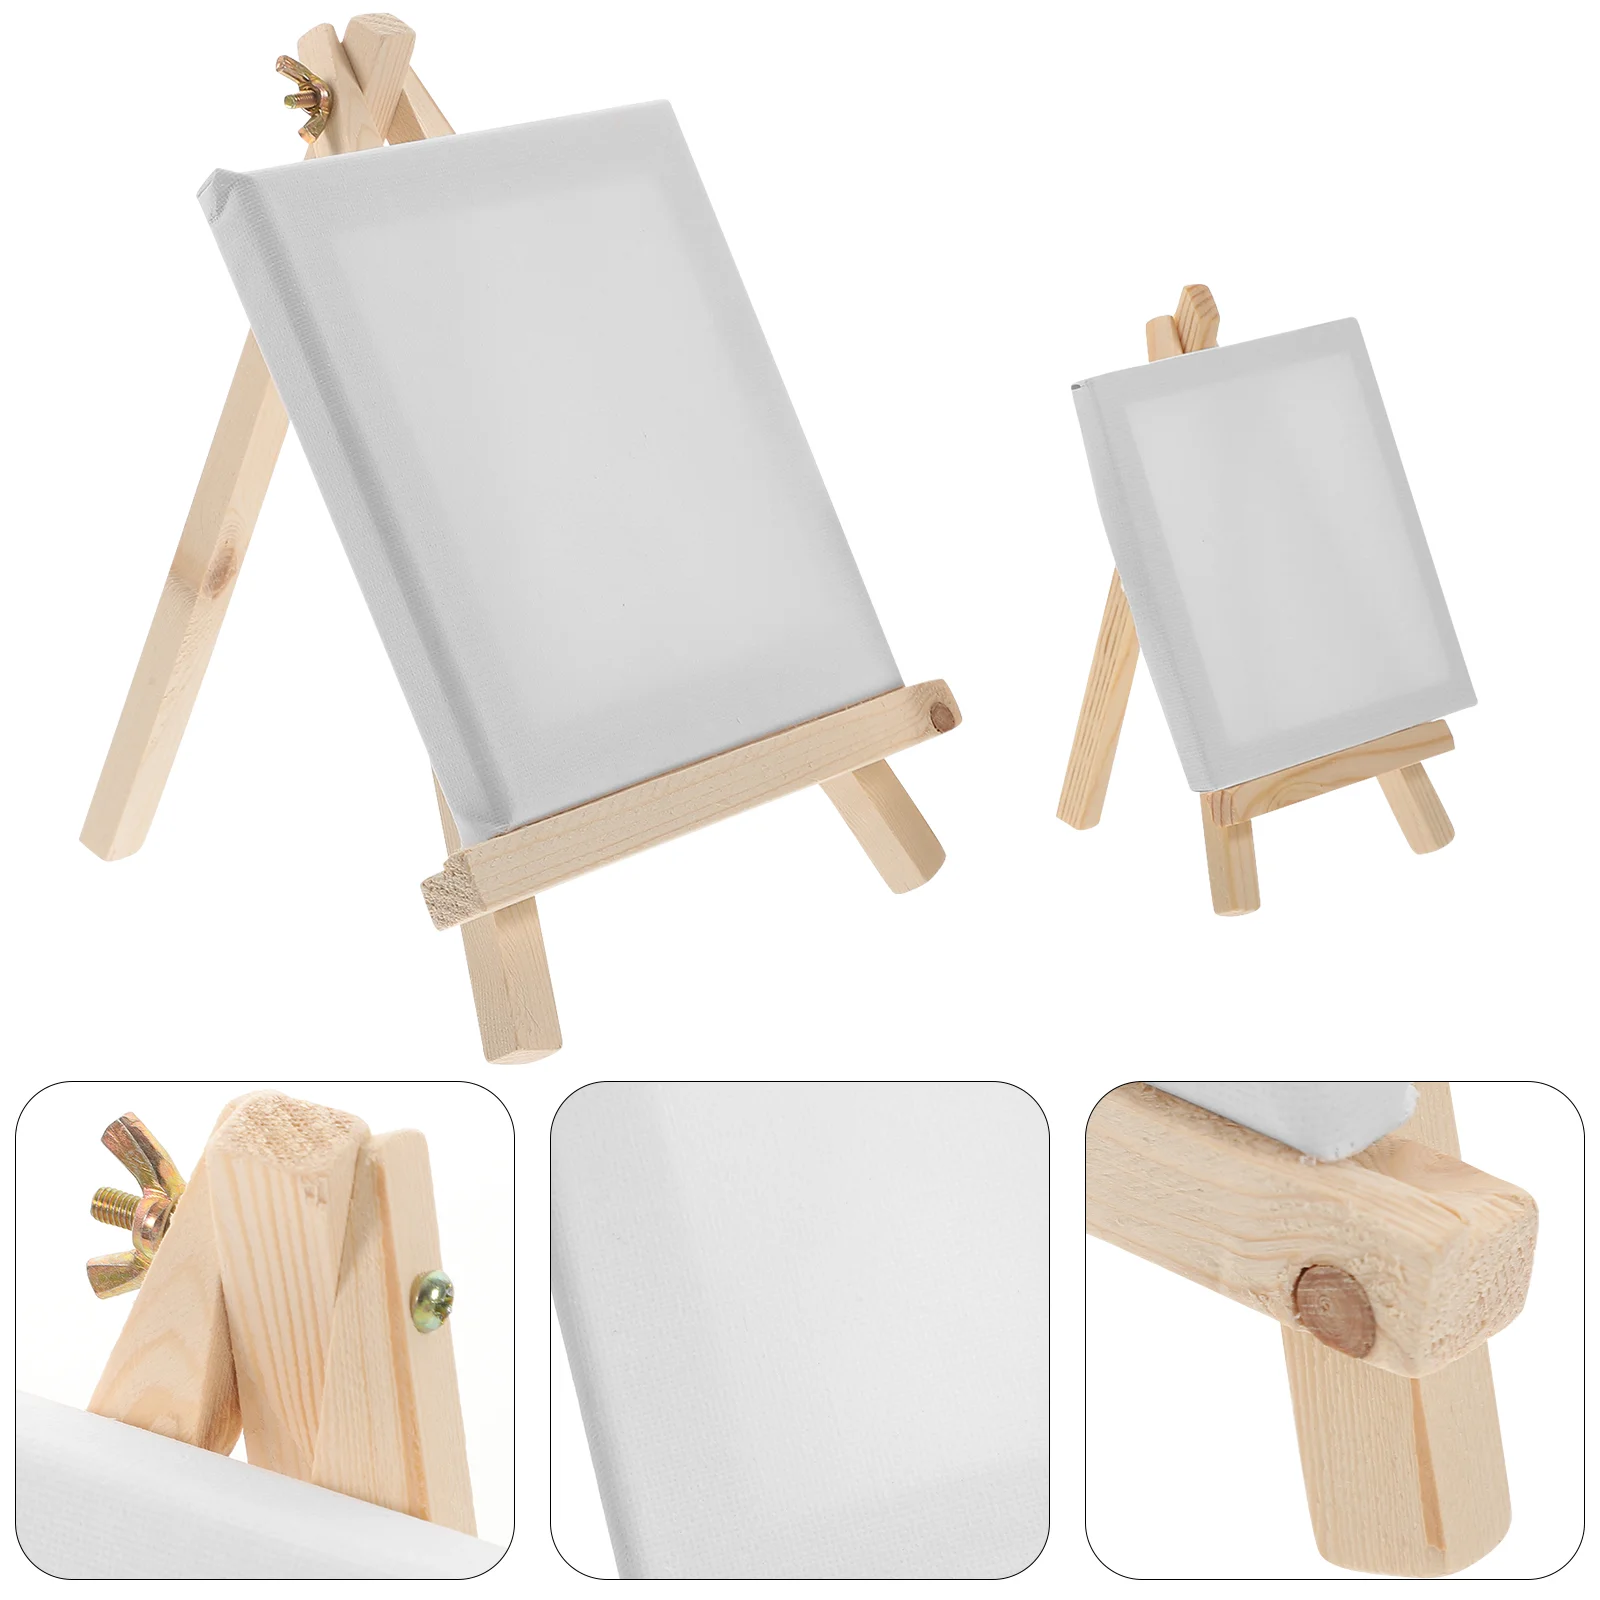 2PCs Canvas Easel Set White Blank Stretched Canvas with Wooden Easel Canvas Panel Boards for Artist Painting Business Wedding easel stand with tray artist painting oporte madera mini canvas easels peinture art picture holder display molbert metal tripod